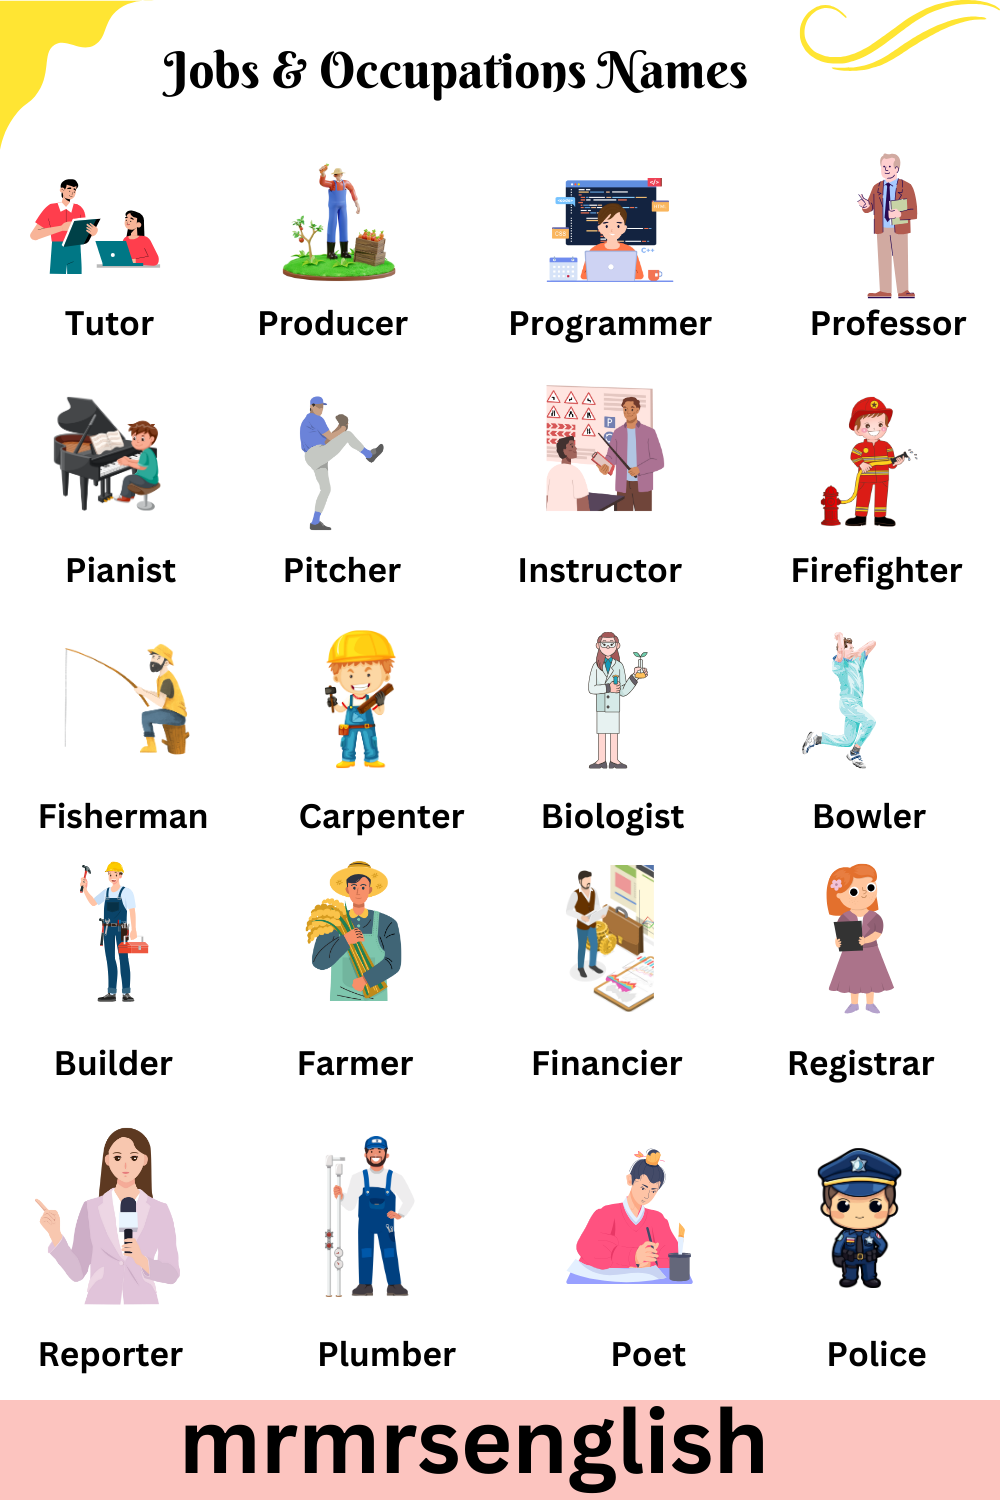 Jobs and Occupations Names in English